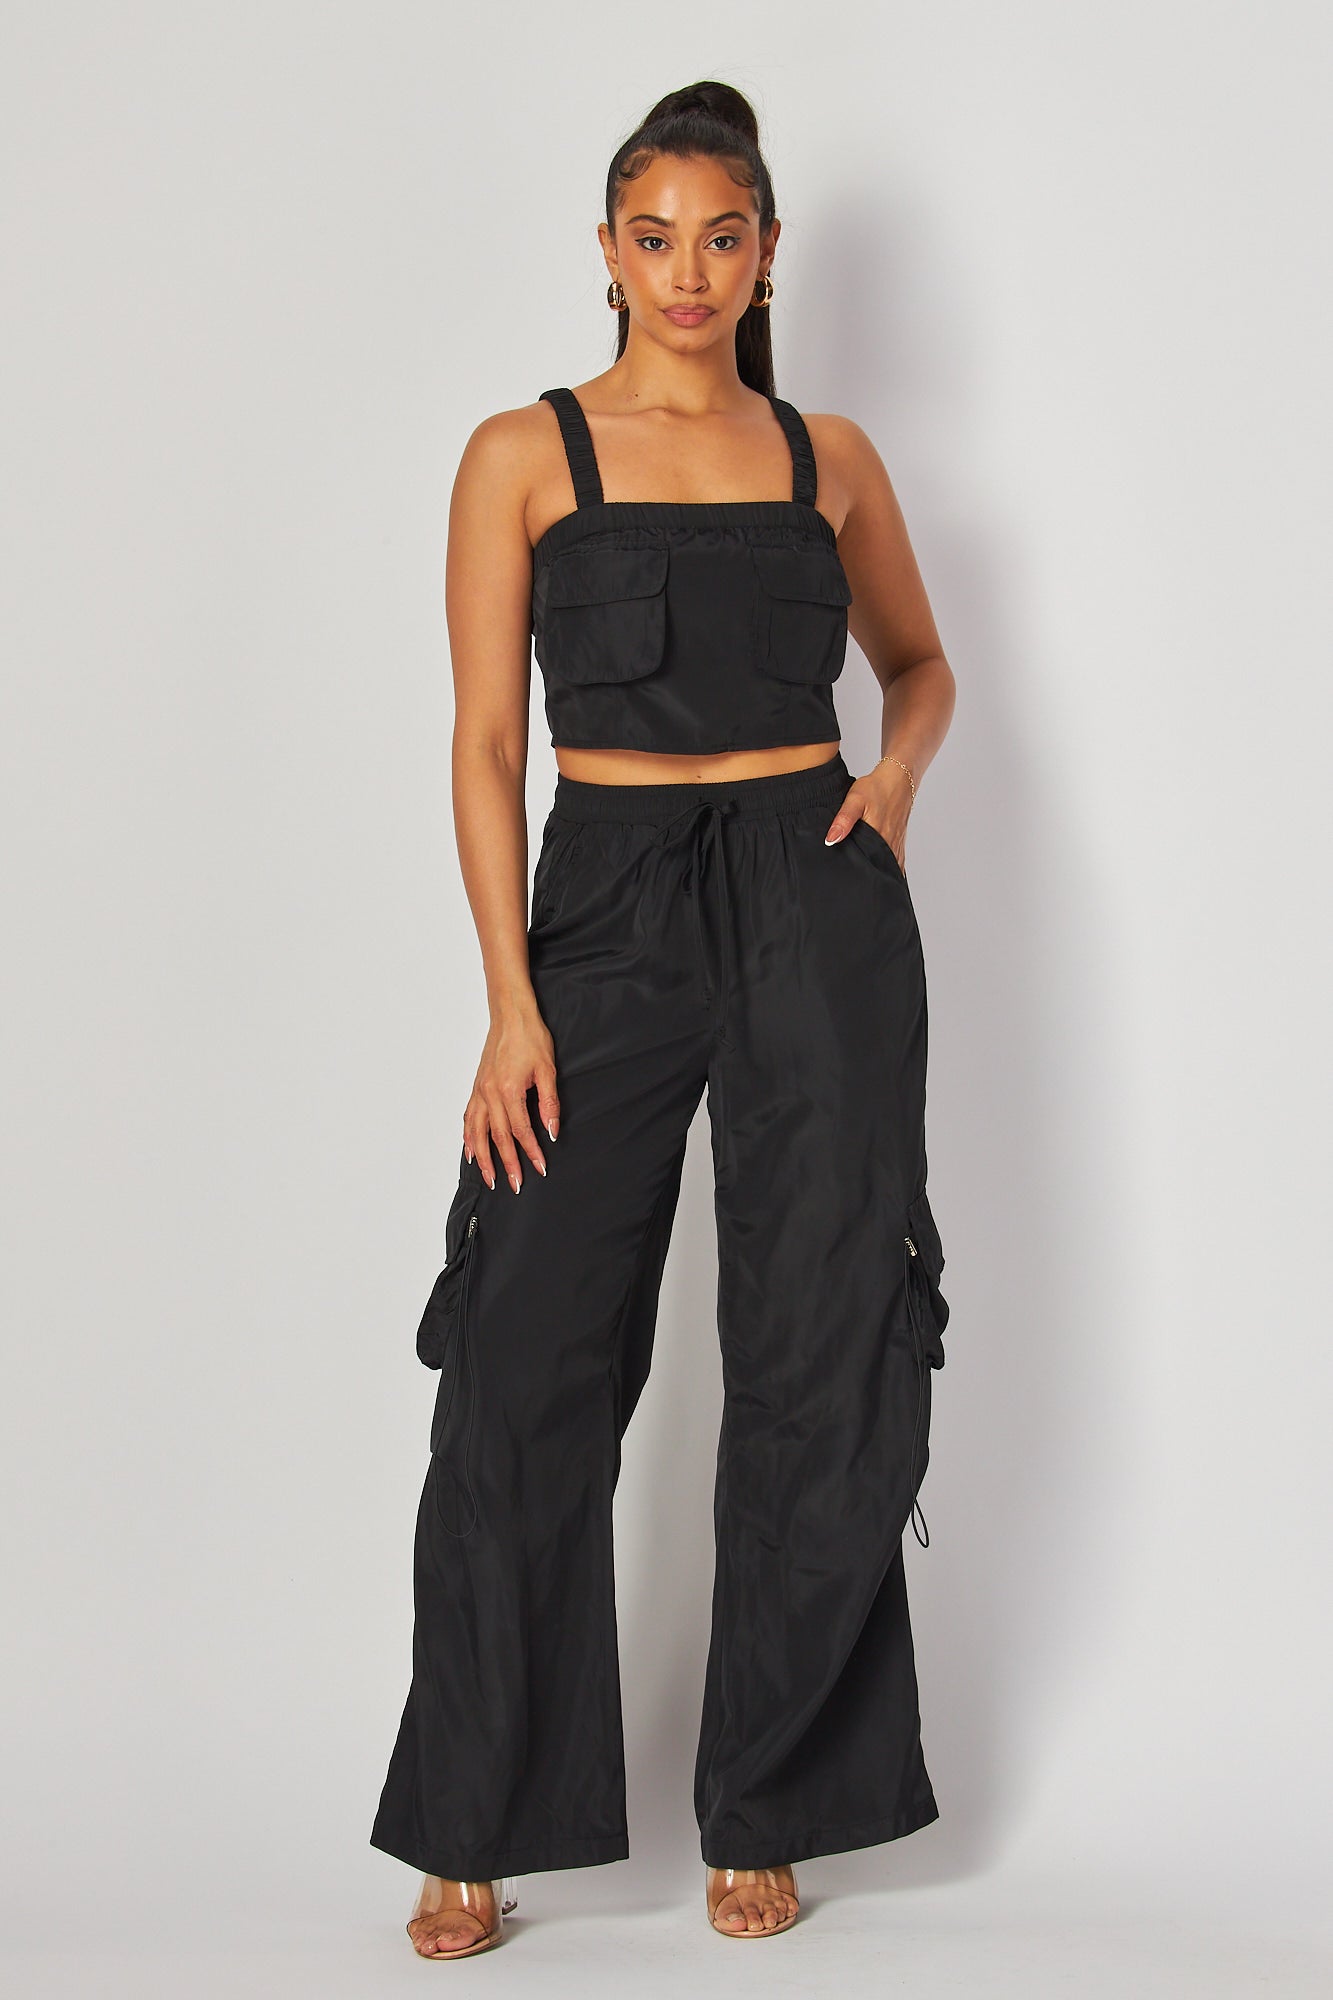 Zuley Crop Tank Top And Cargo Pocket Pants